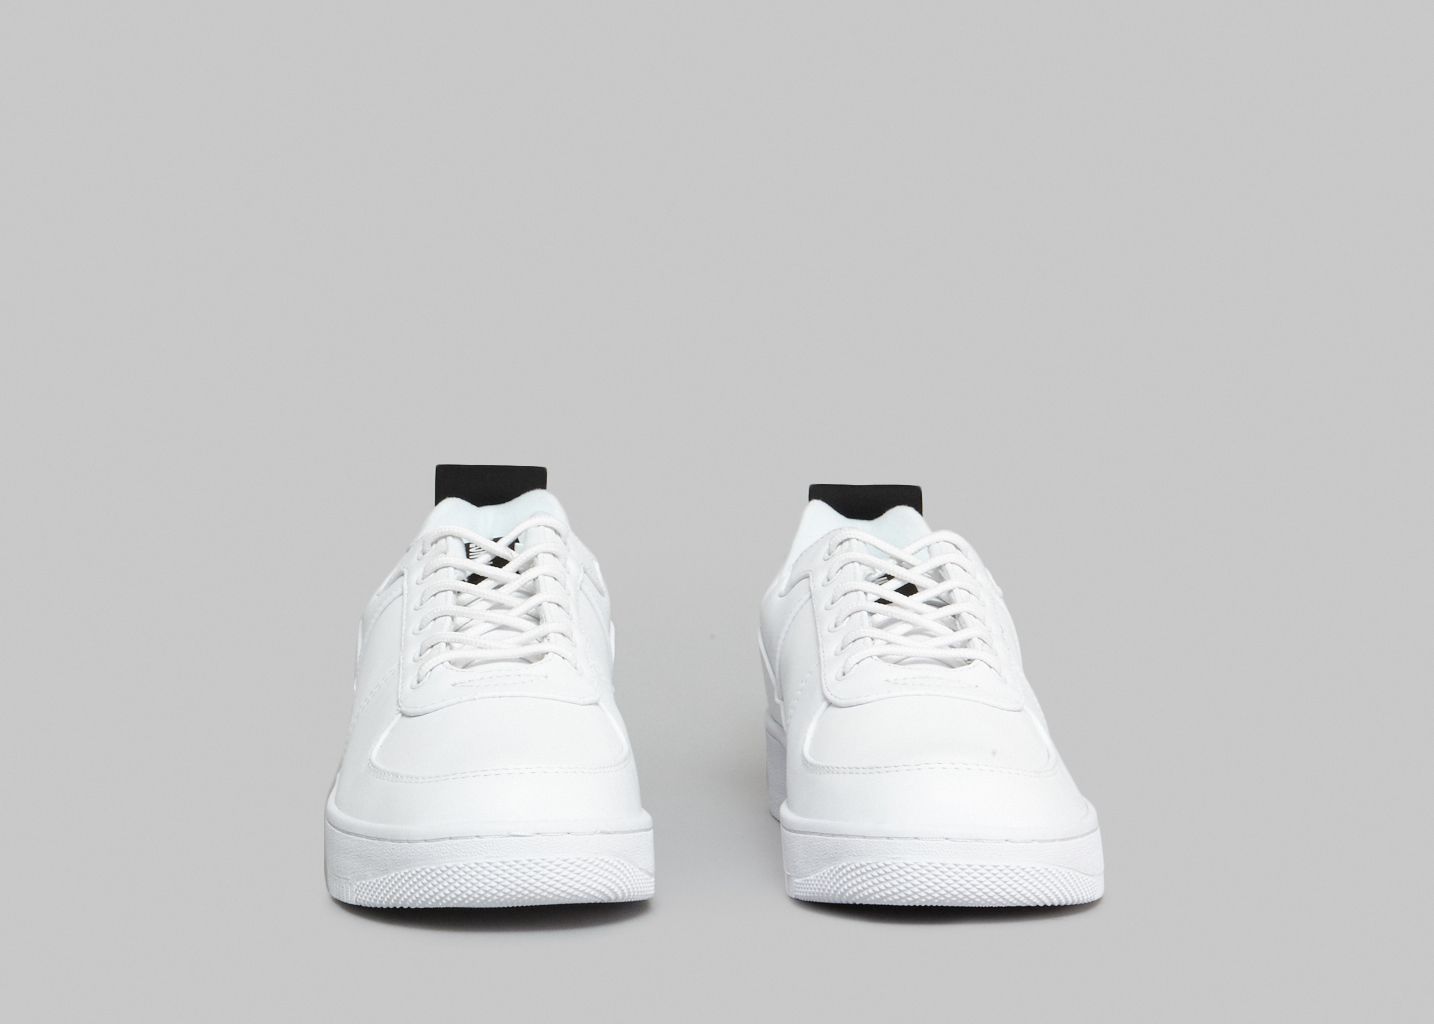 Sneakers Master On/Off - Kwots